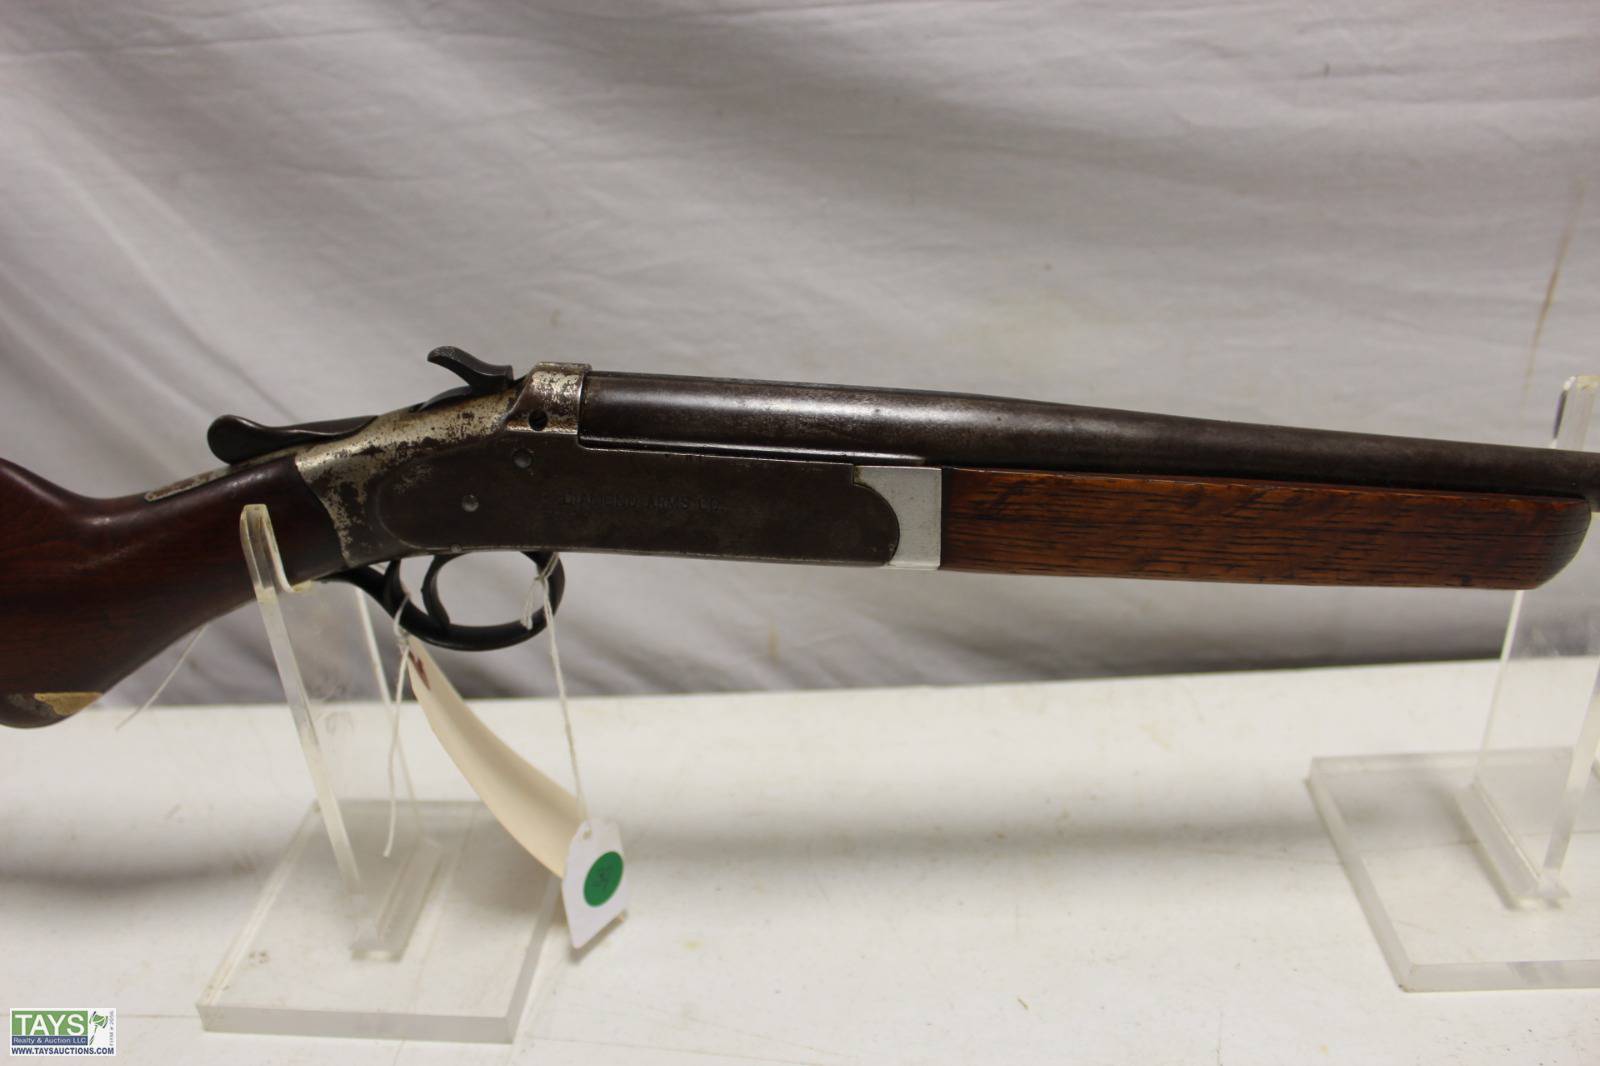 Tays Realty & Auction - Auction: ONLINE ABSOLUTE AUCTION: FIREARMS -  FIREARM PARTS - SPORTING GOODS ITEM: Diamond Arms Shapleigh's King Nitro  410 Ga Single Shot Shotgun